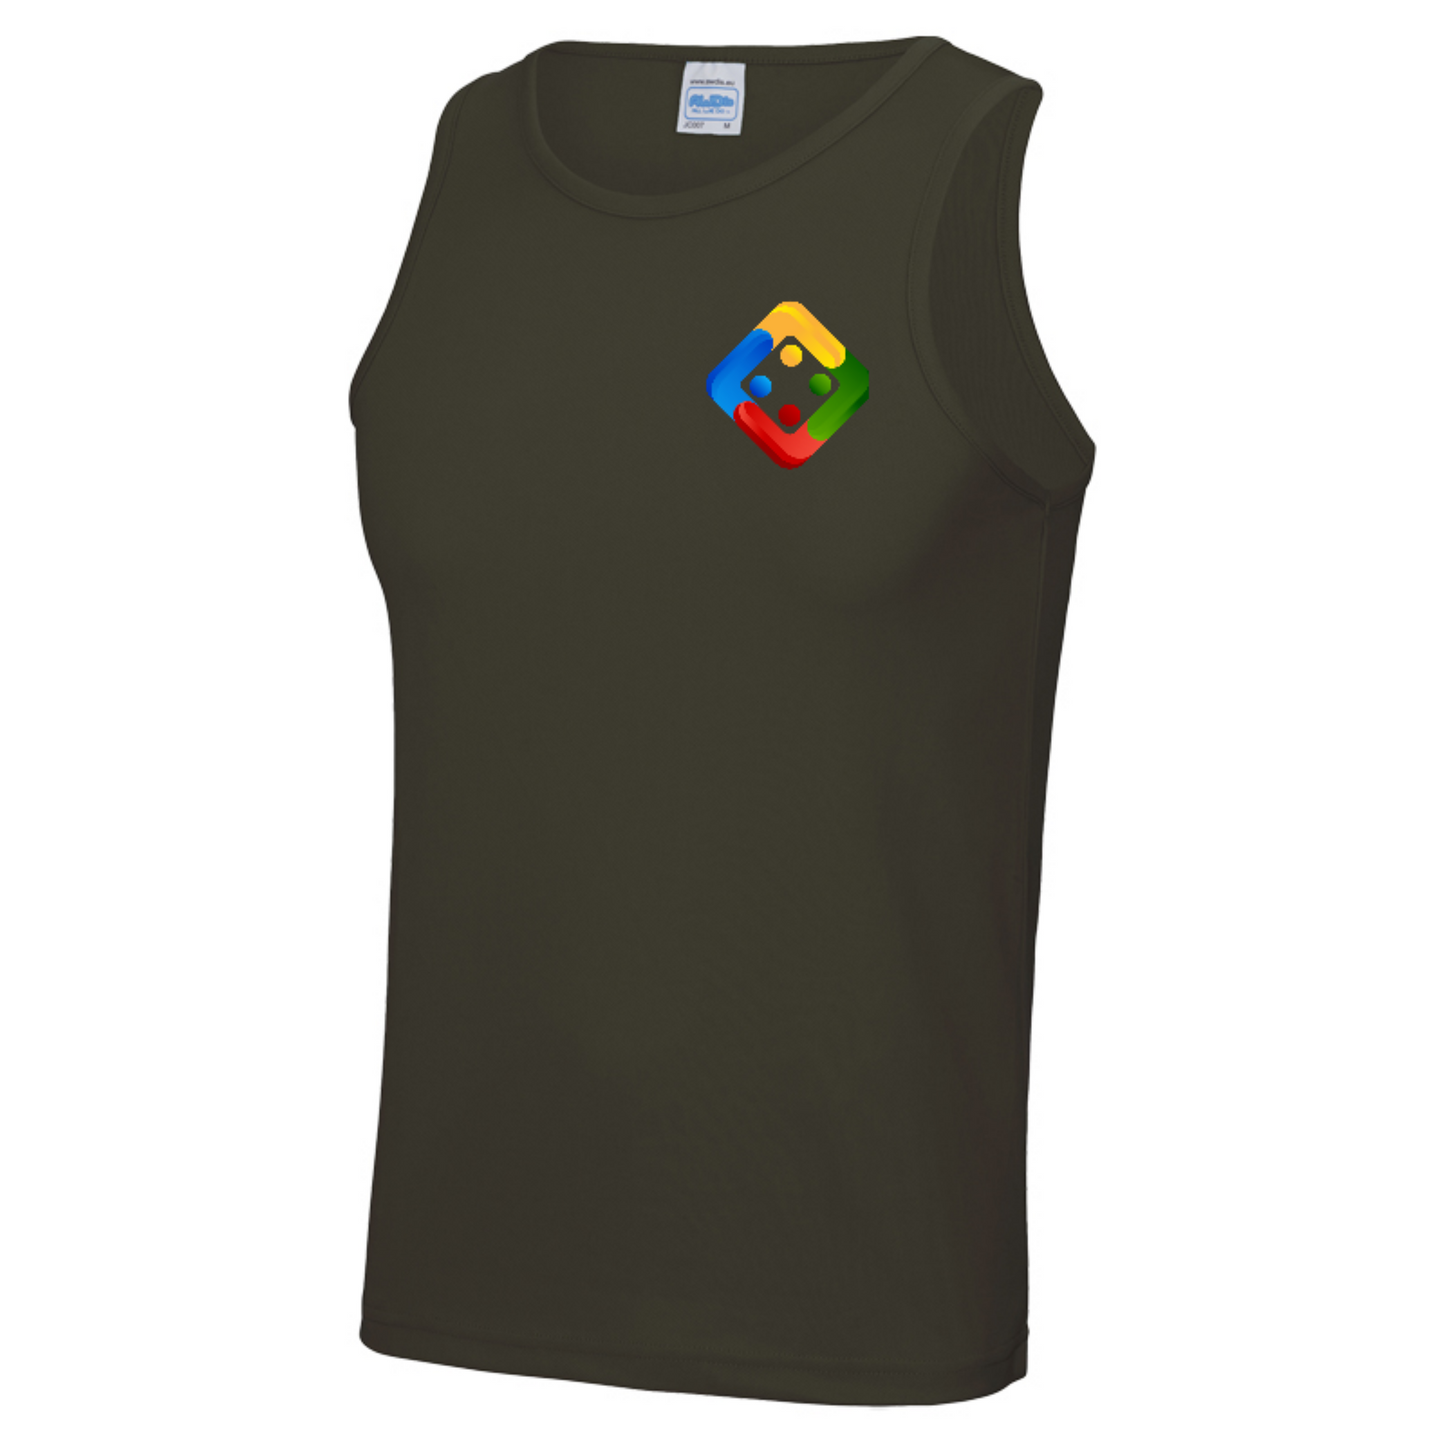 Men's cool sports vest in dark colours with small printed Uckers emblem. Available in 9 colours.